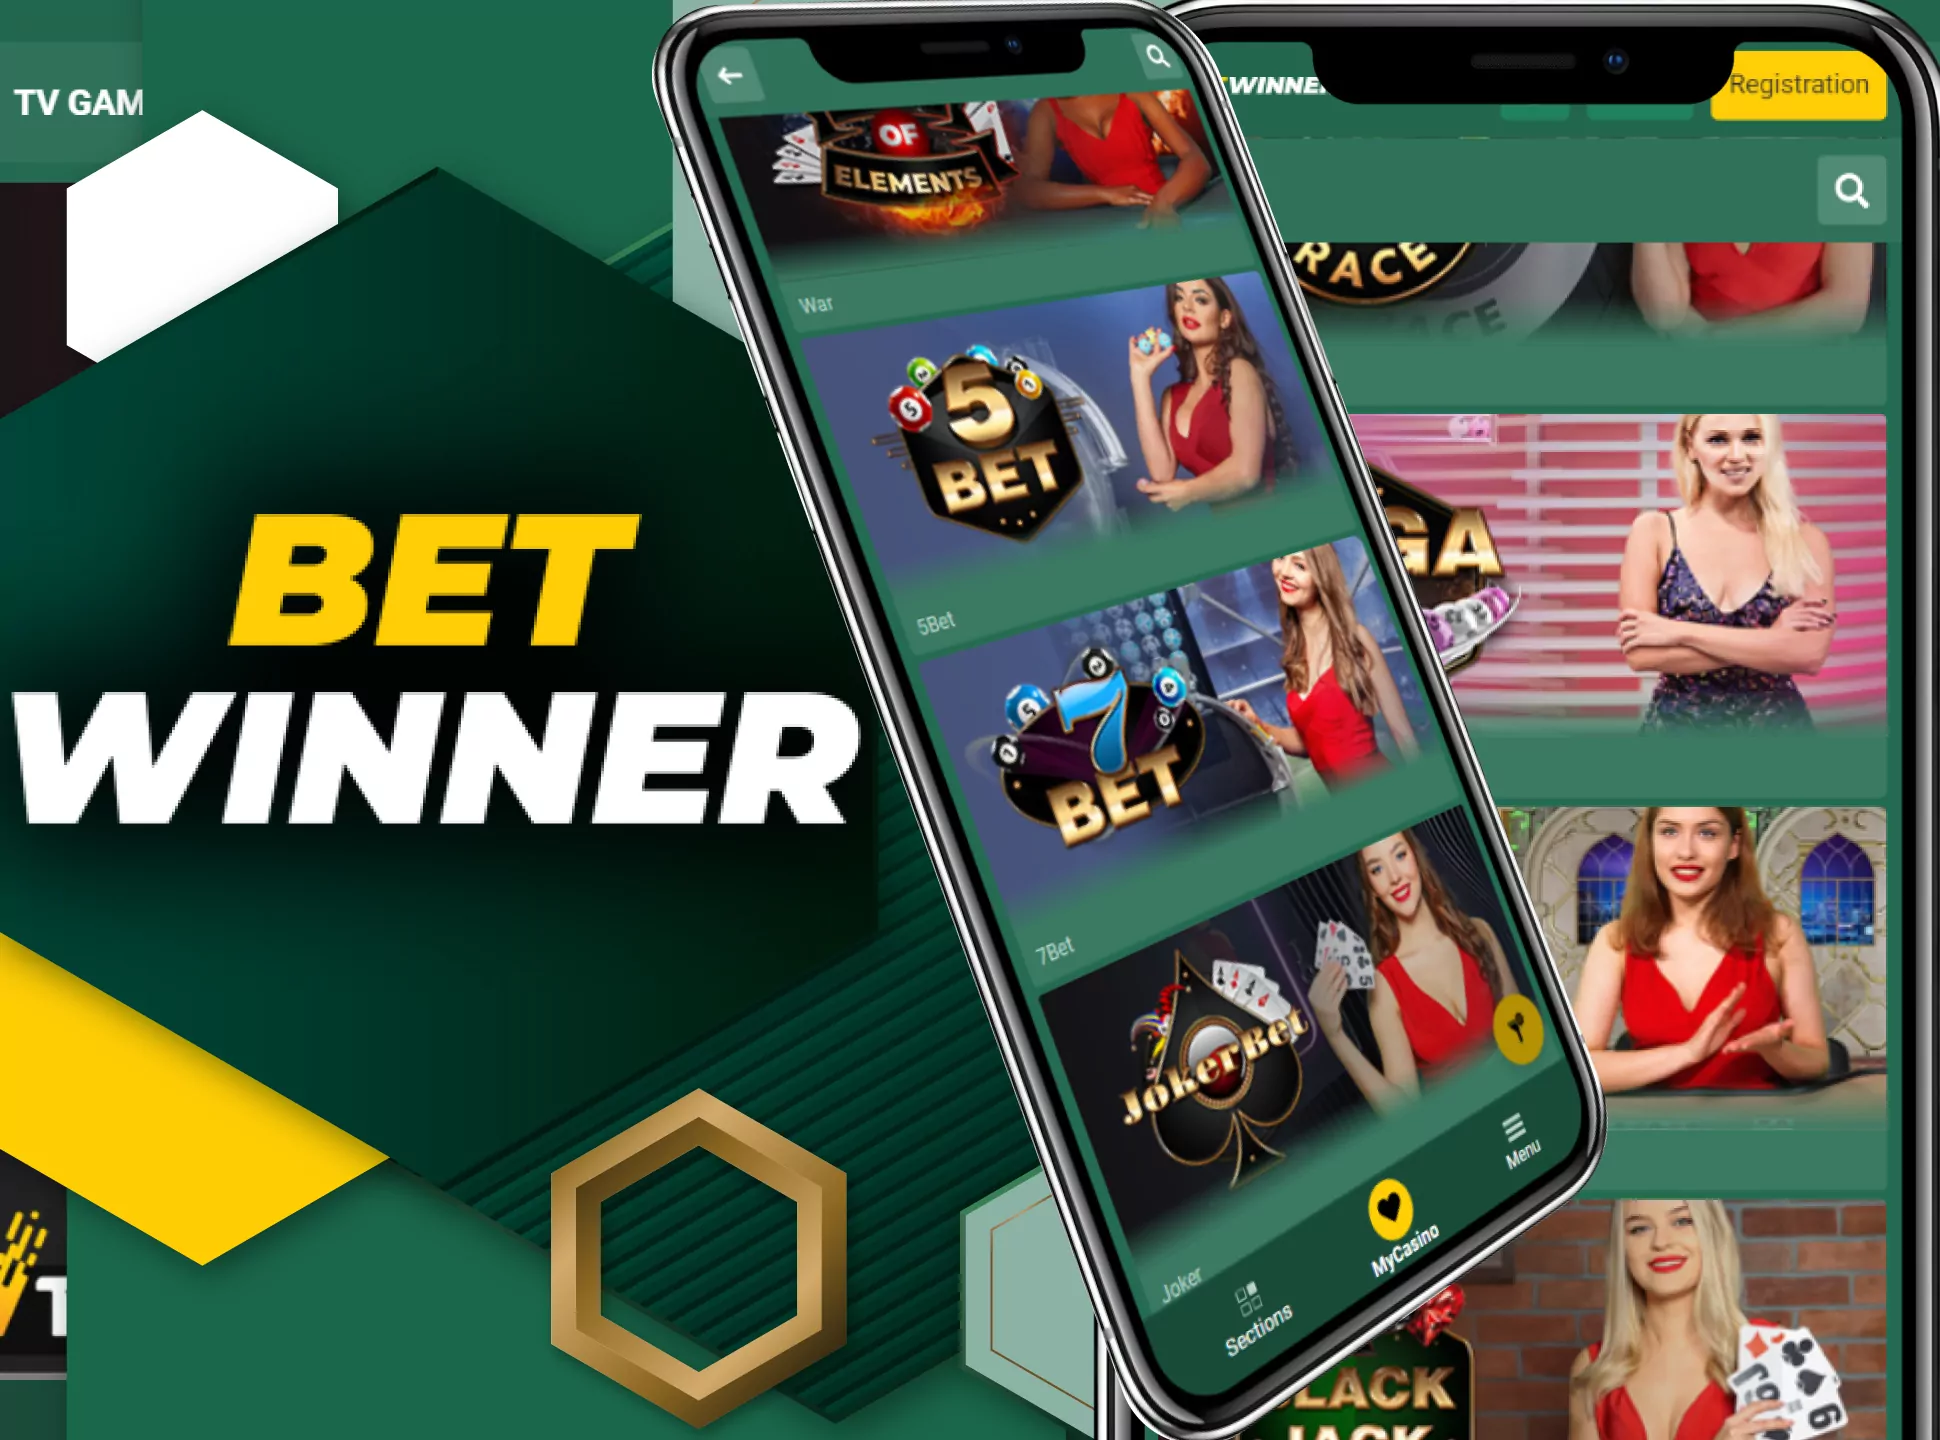 Play Win Games in the Betwinner casino and win more money.